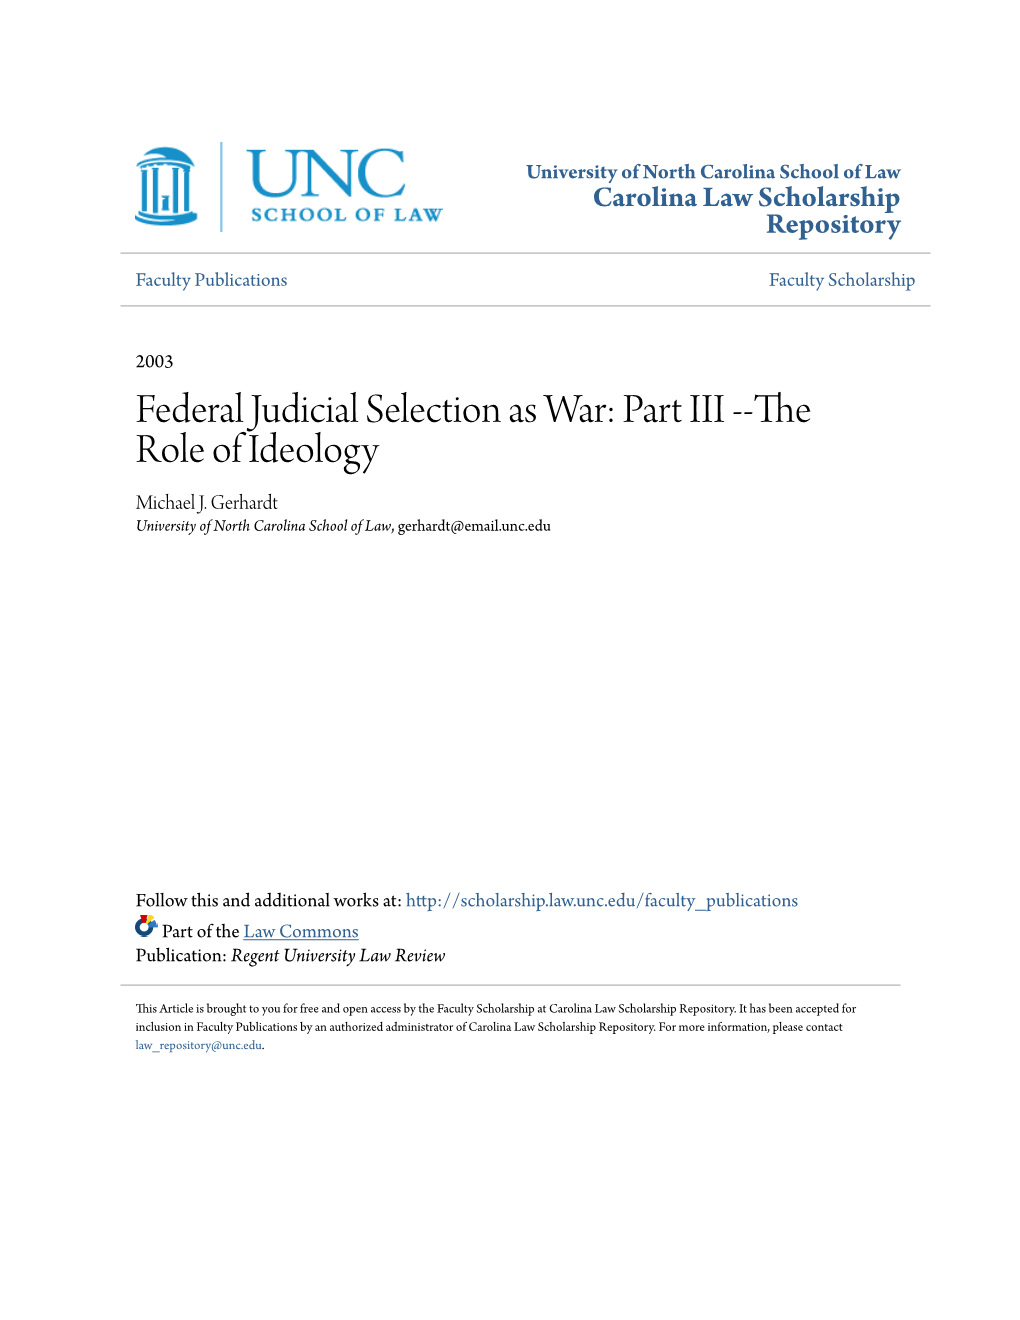 Federal Judicial Selection As War: Part III --The Role of Ideology Michael J